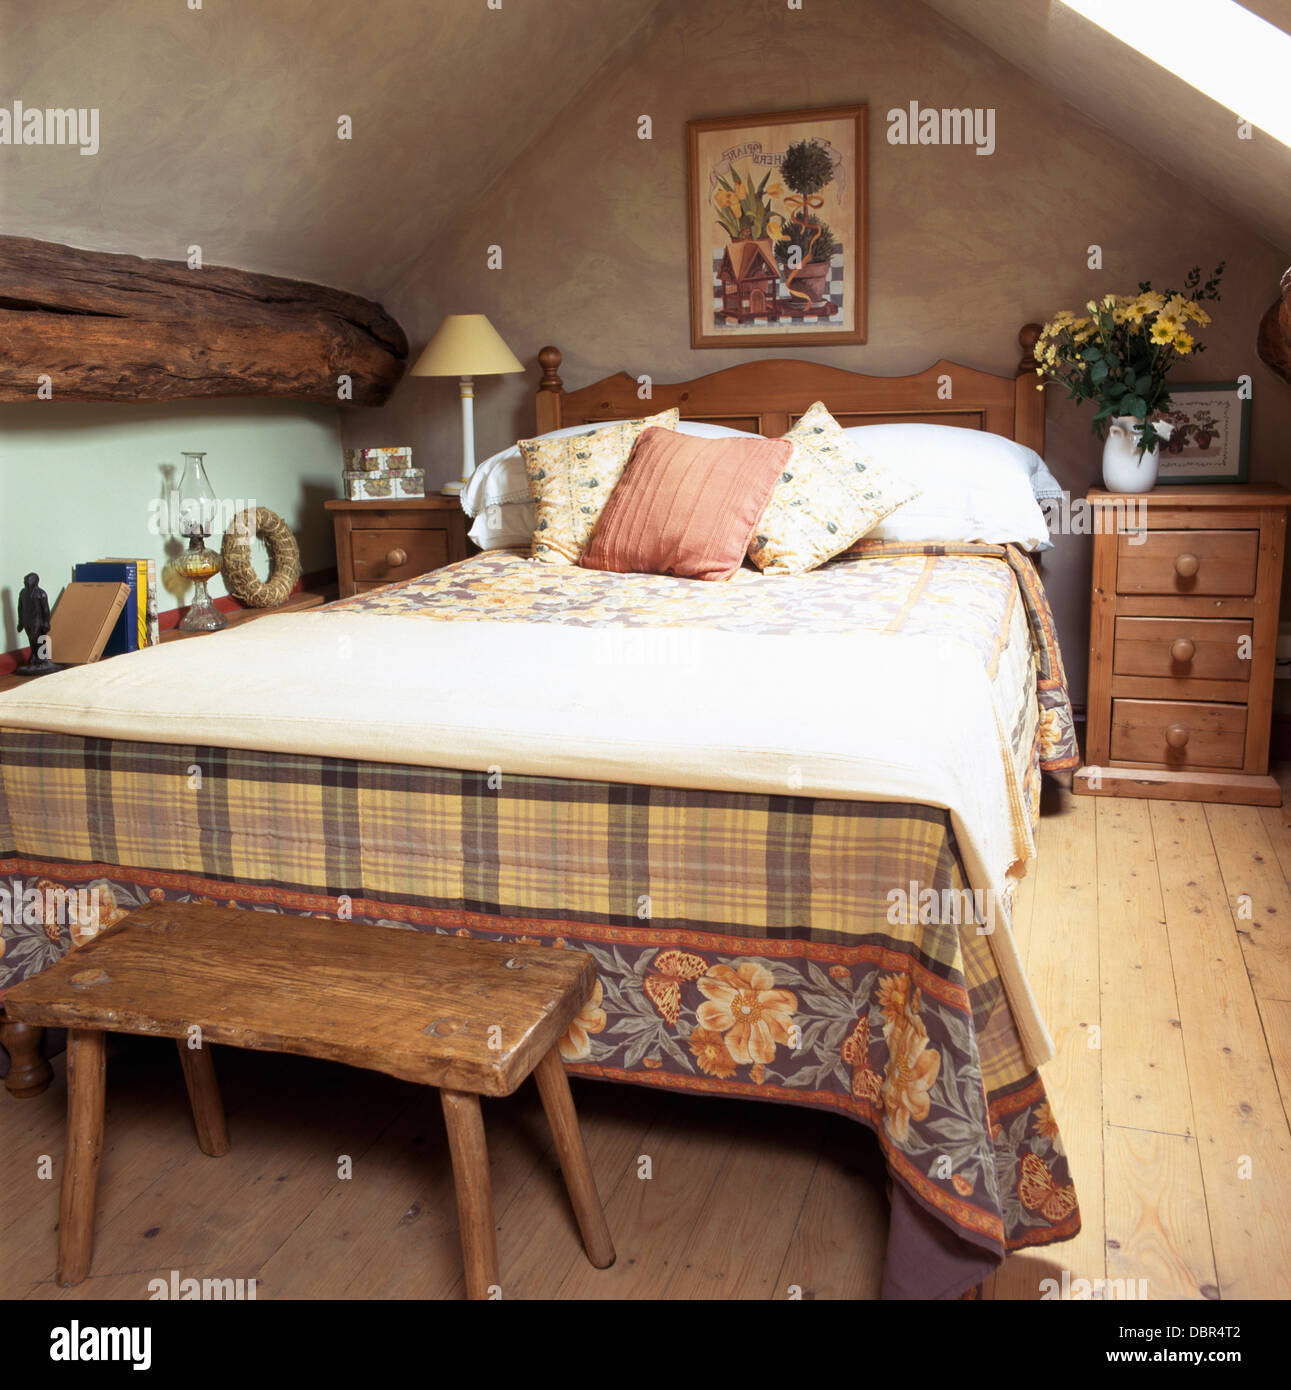 Old wooden stool below bed with cream throw and patterned bed cover in attic bedroom with wooden flooring Stock Photo